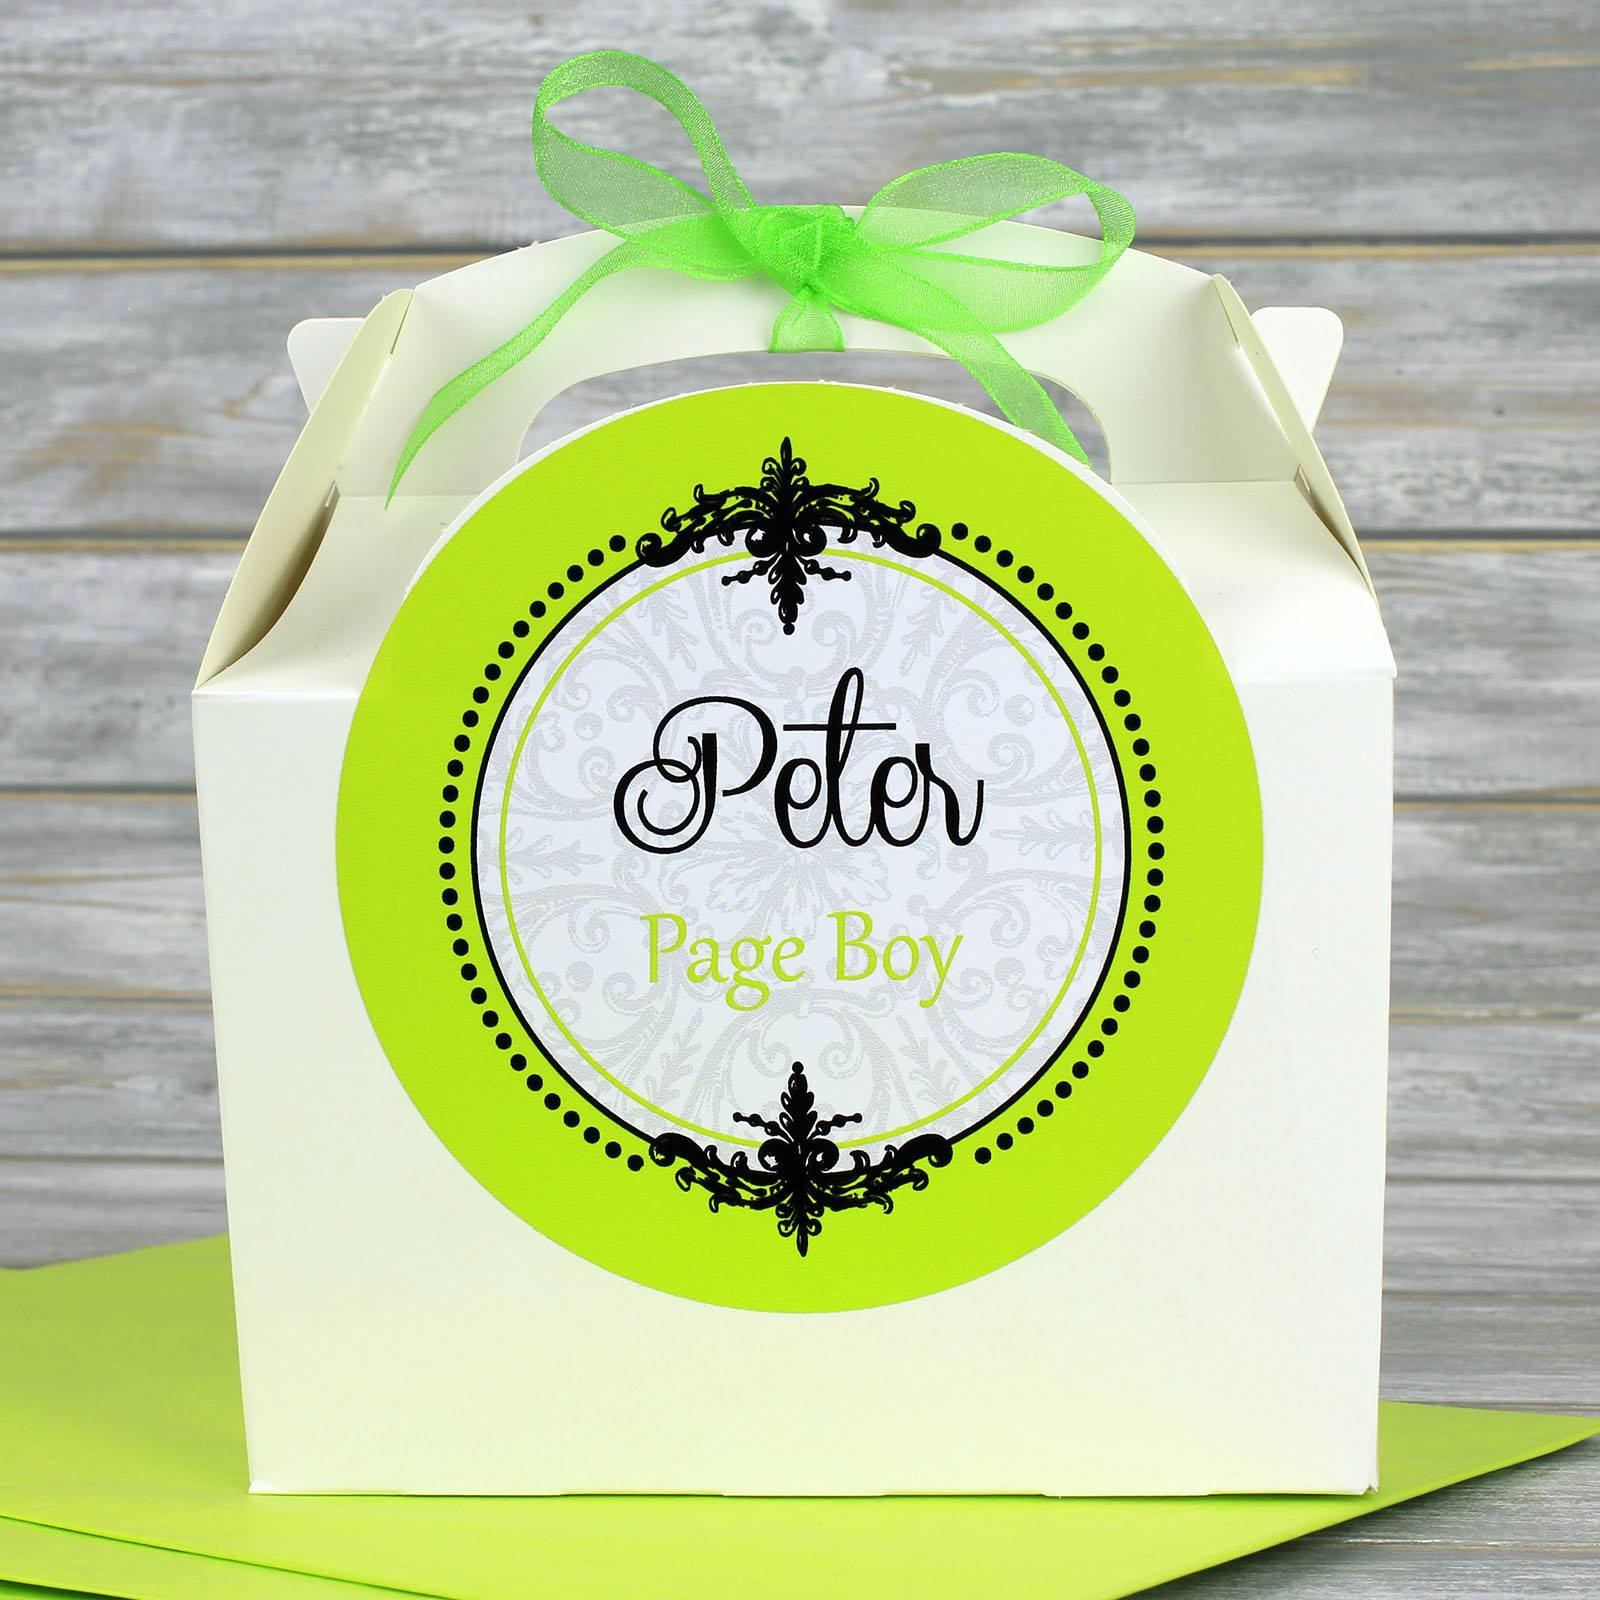 Wedding Favour Box - Personalised White Children's Activity Box Or Guest Wedding Favour